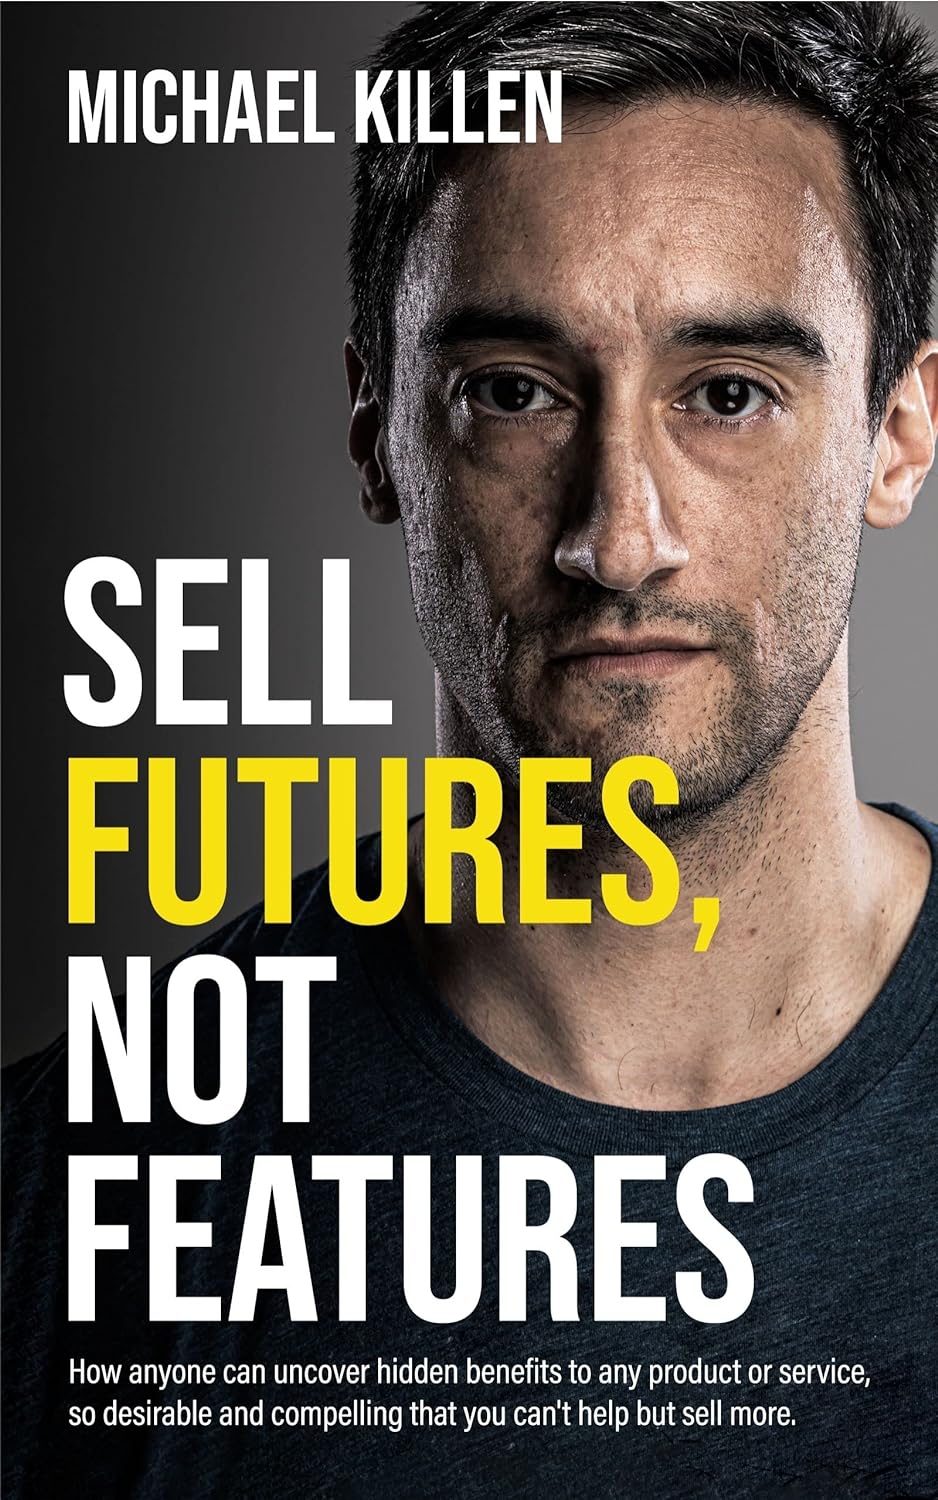 Sell Futures-Not Features-How anyone can uncover hidden benefits to any product or service-Michael Killen-stumbit business